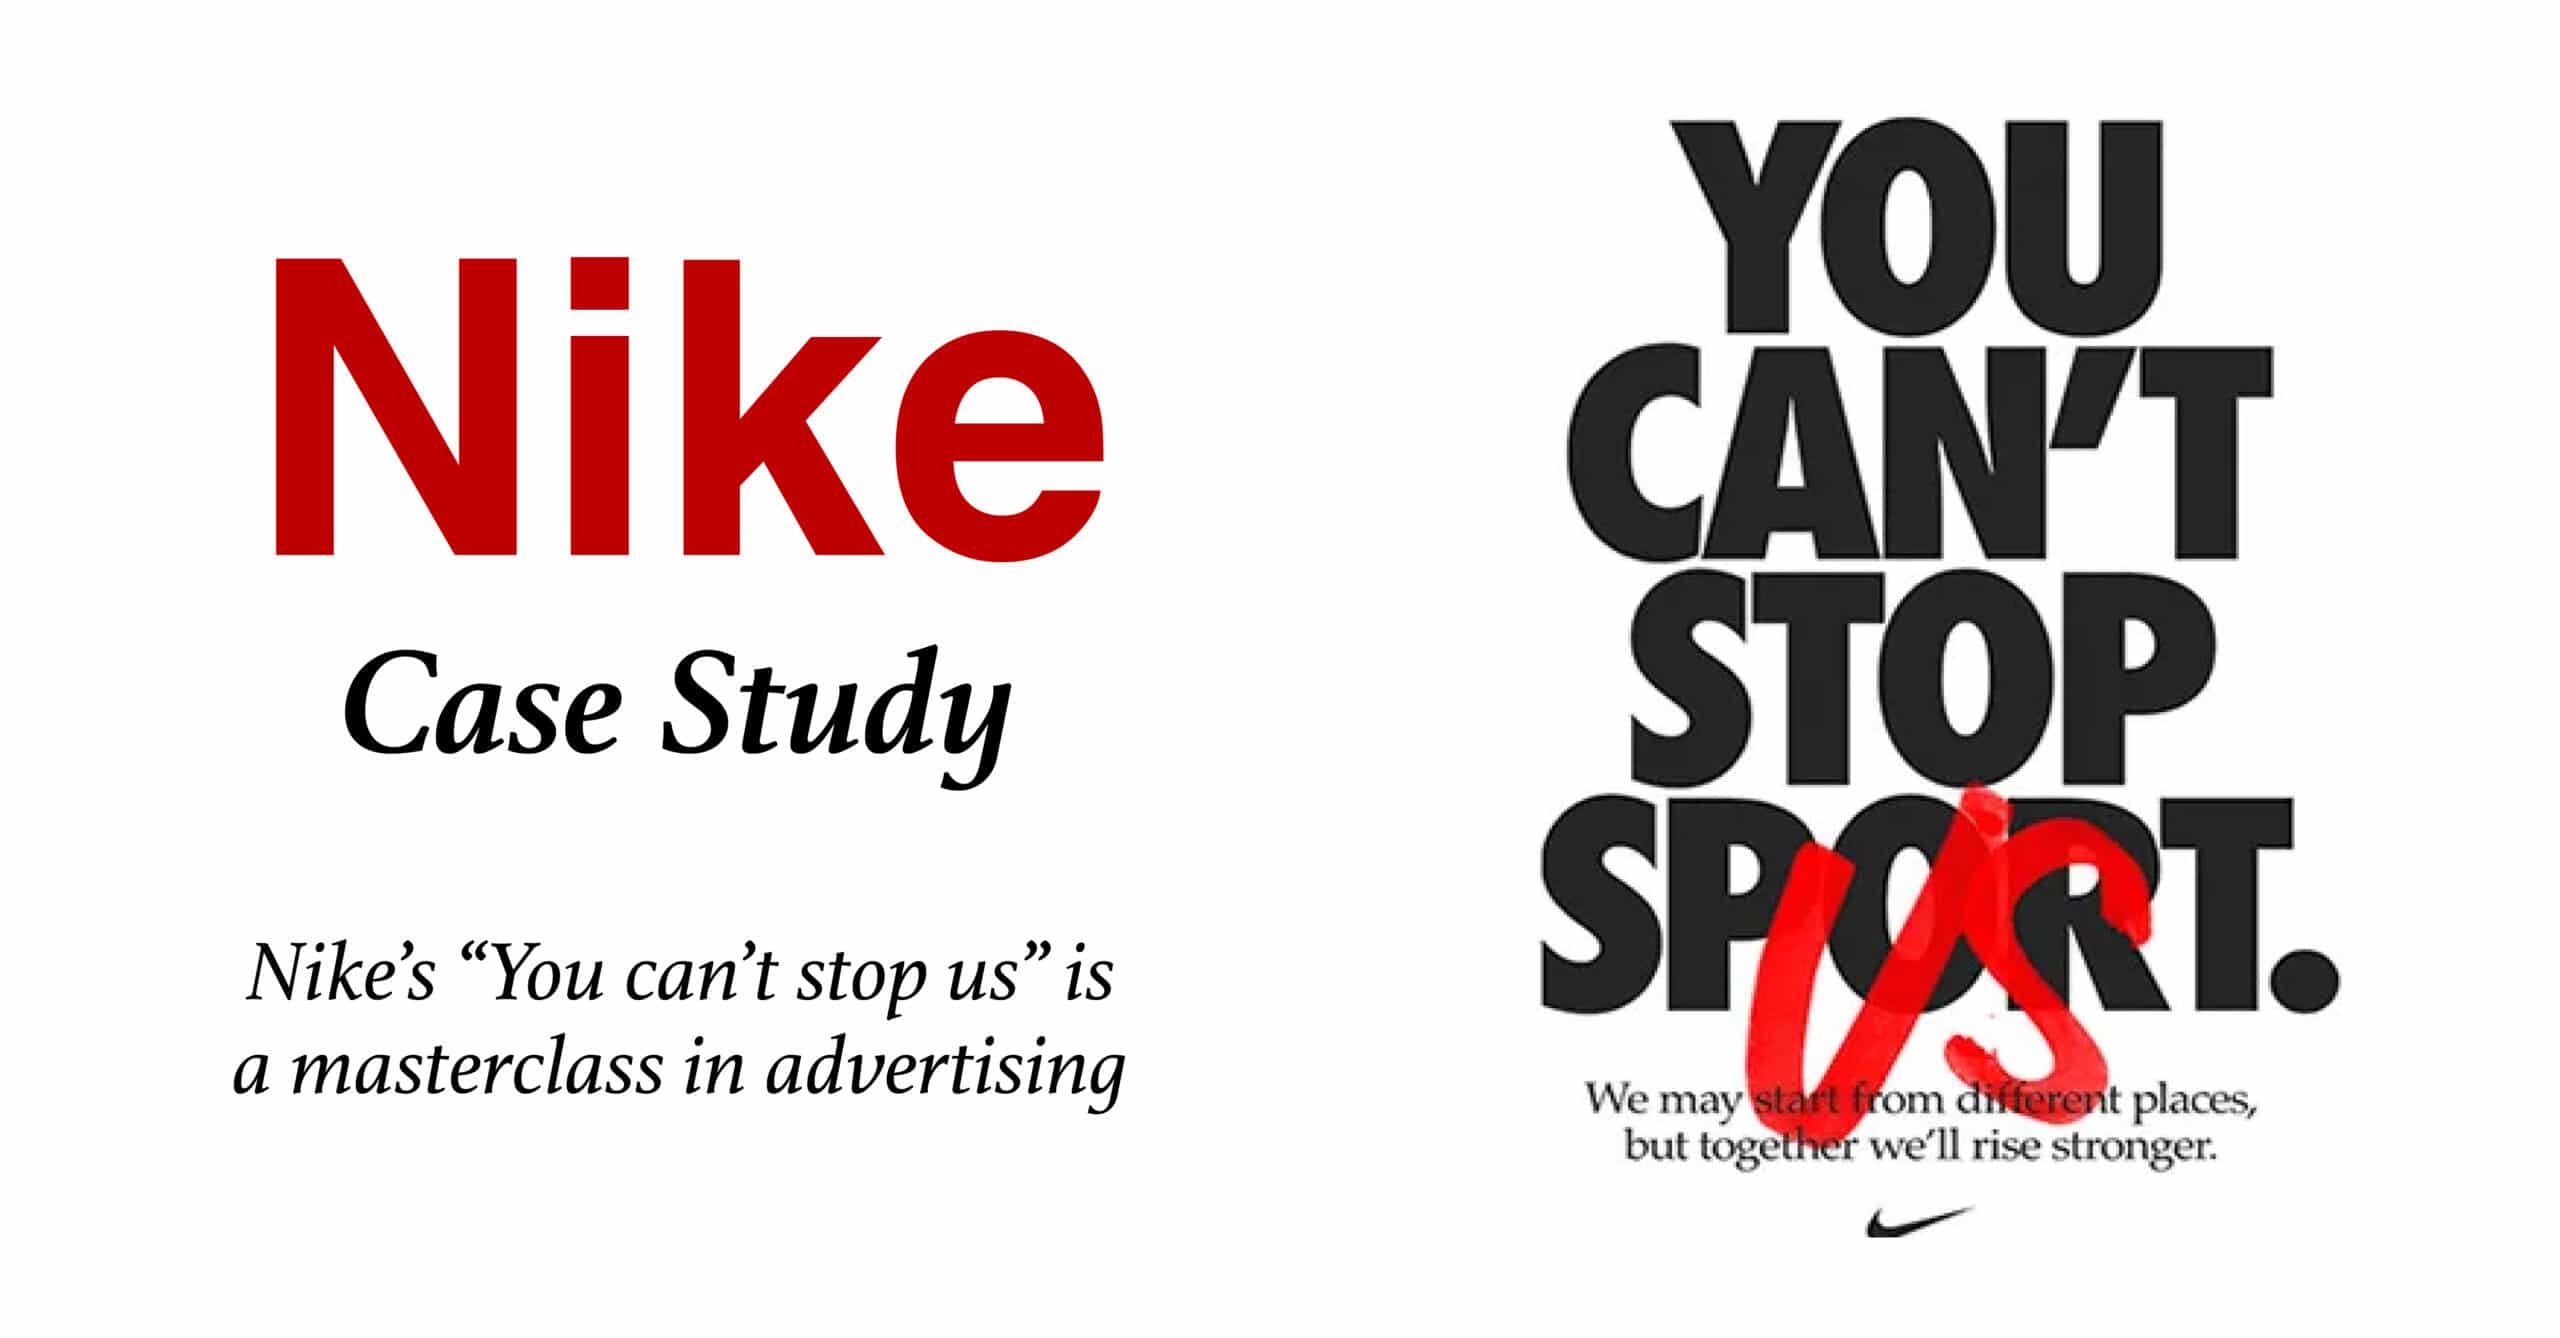 Nike's 'You can't stop us' advertising masterclass